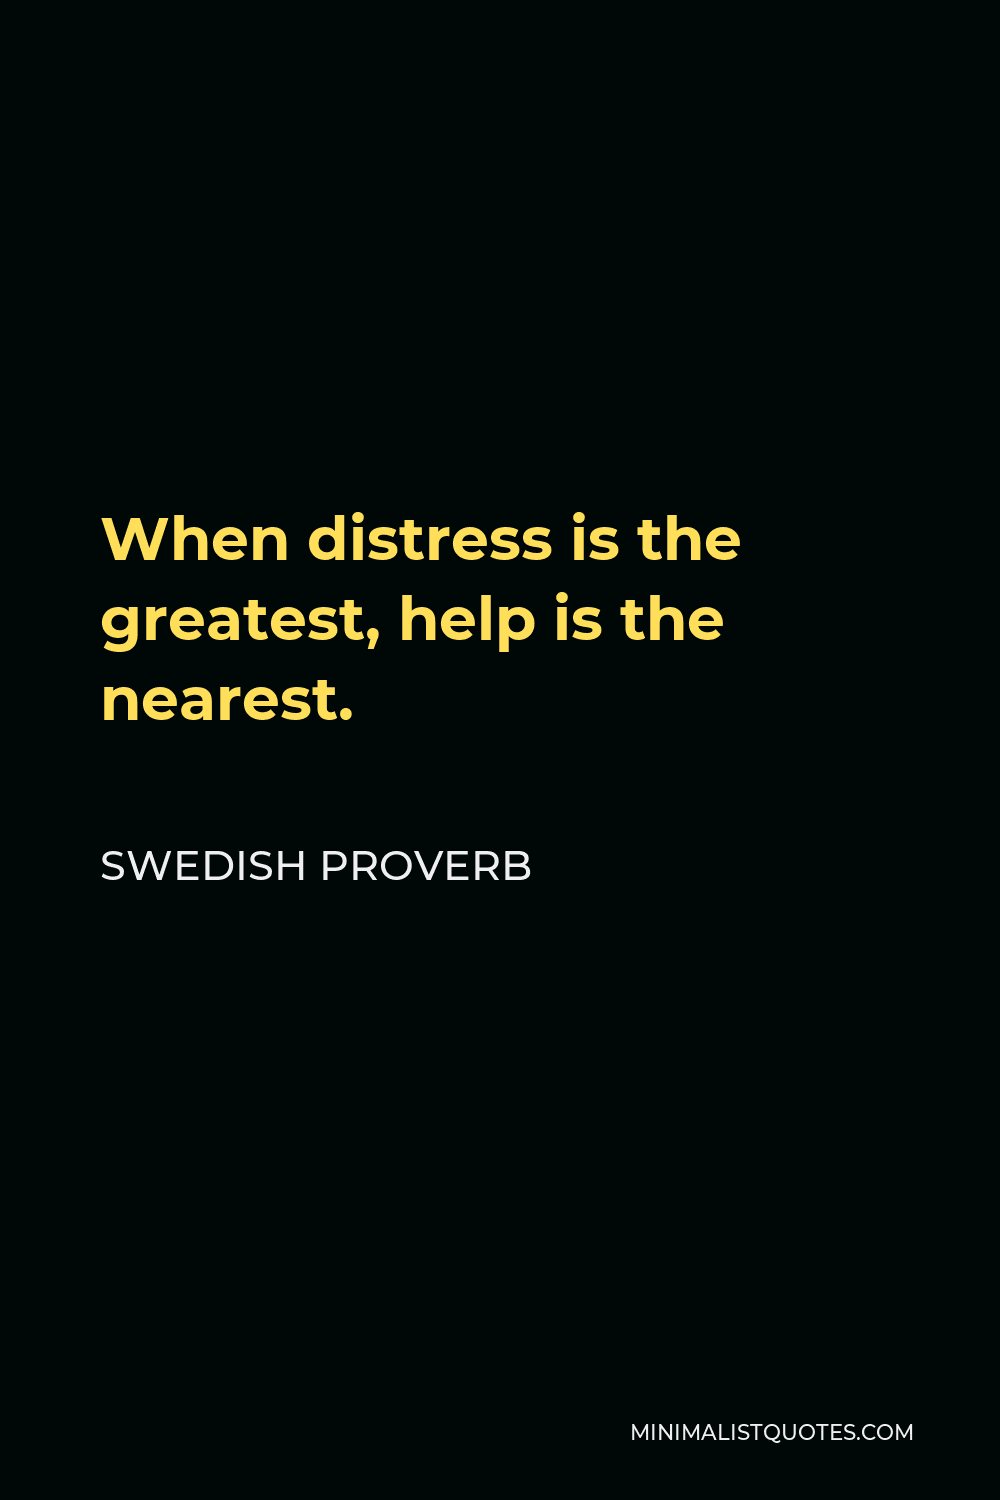 Swedish Proverb Quote - When distress is the greatest, help is the nearest.